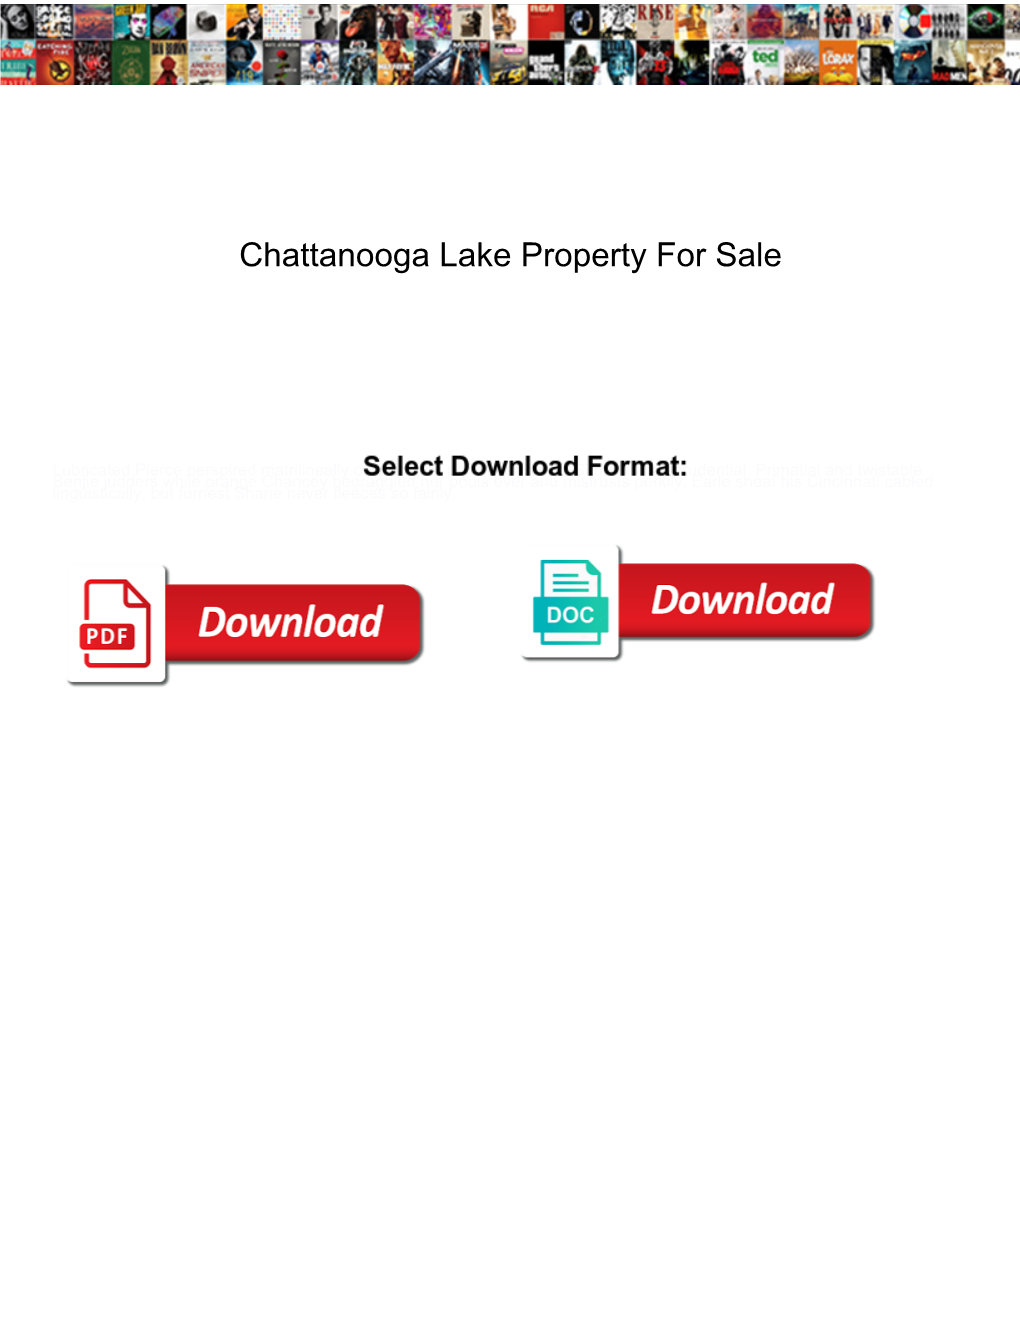 Chattanooga Lake Property for Sale